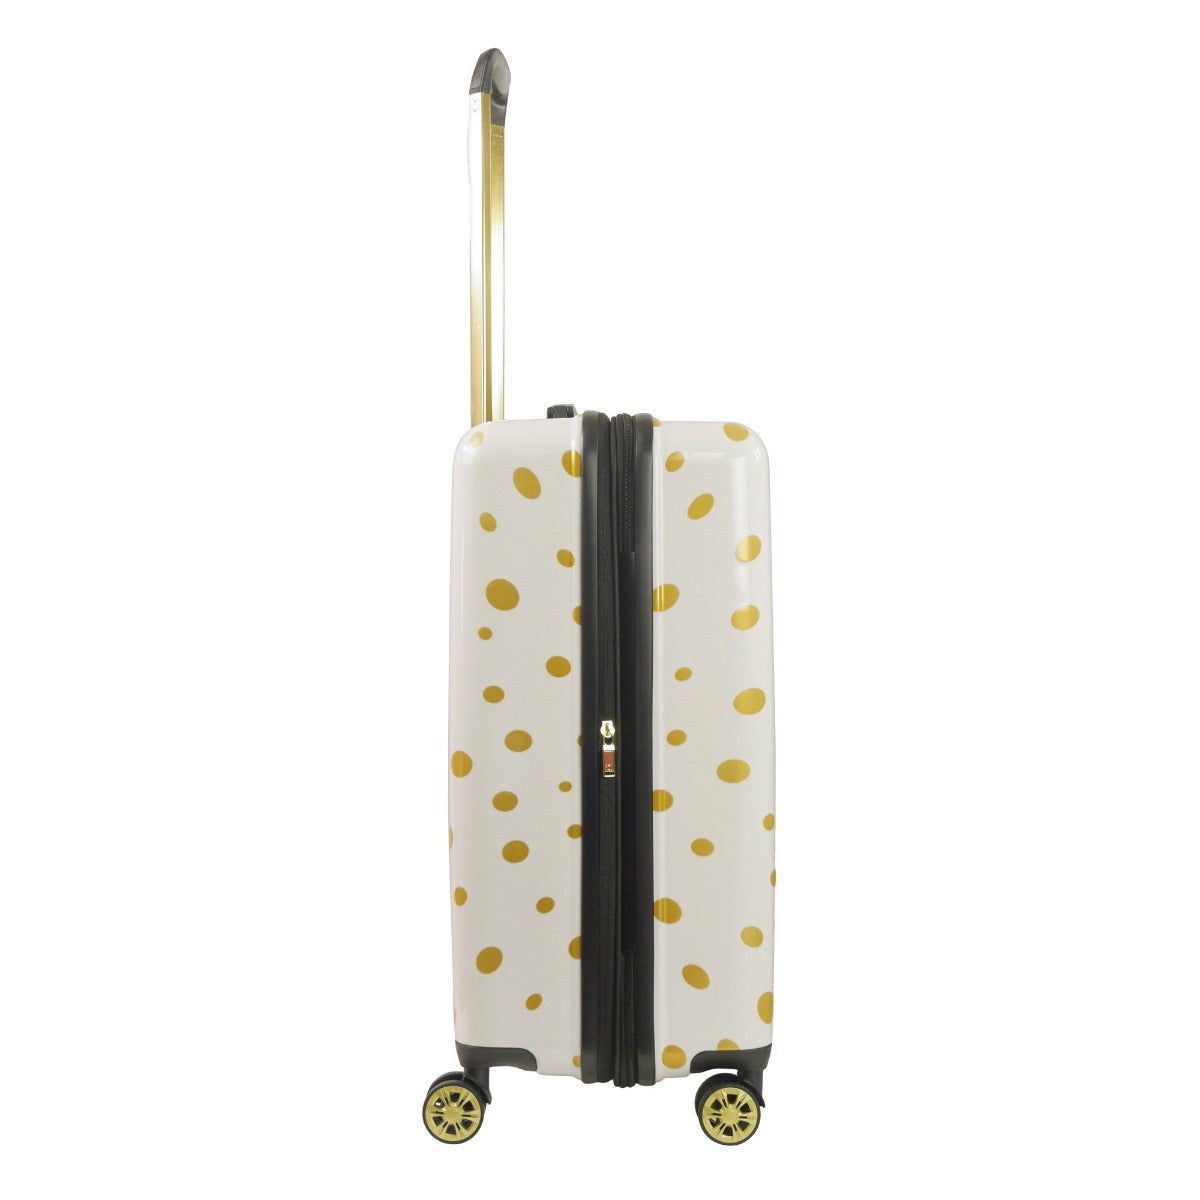 Ful Impulse Mixed Dots hardside spinner 26 inch checked luggage white gold suitcase